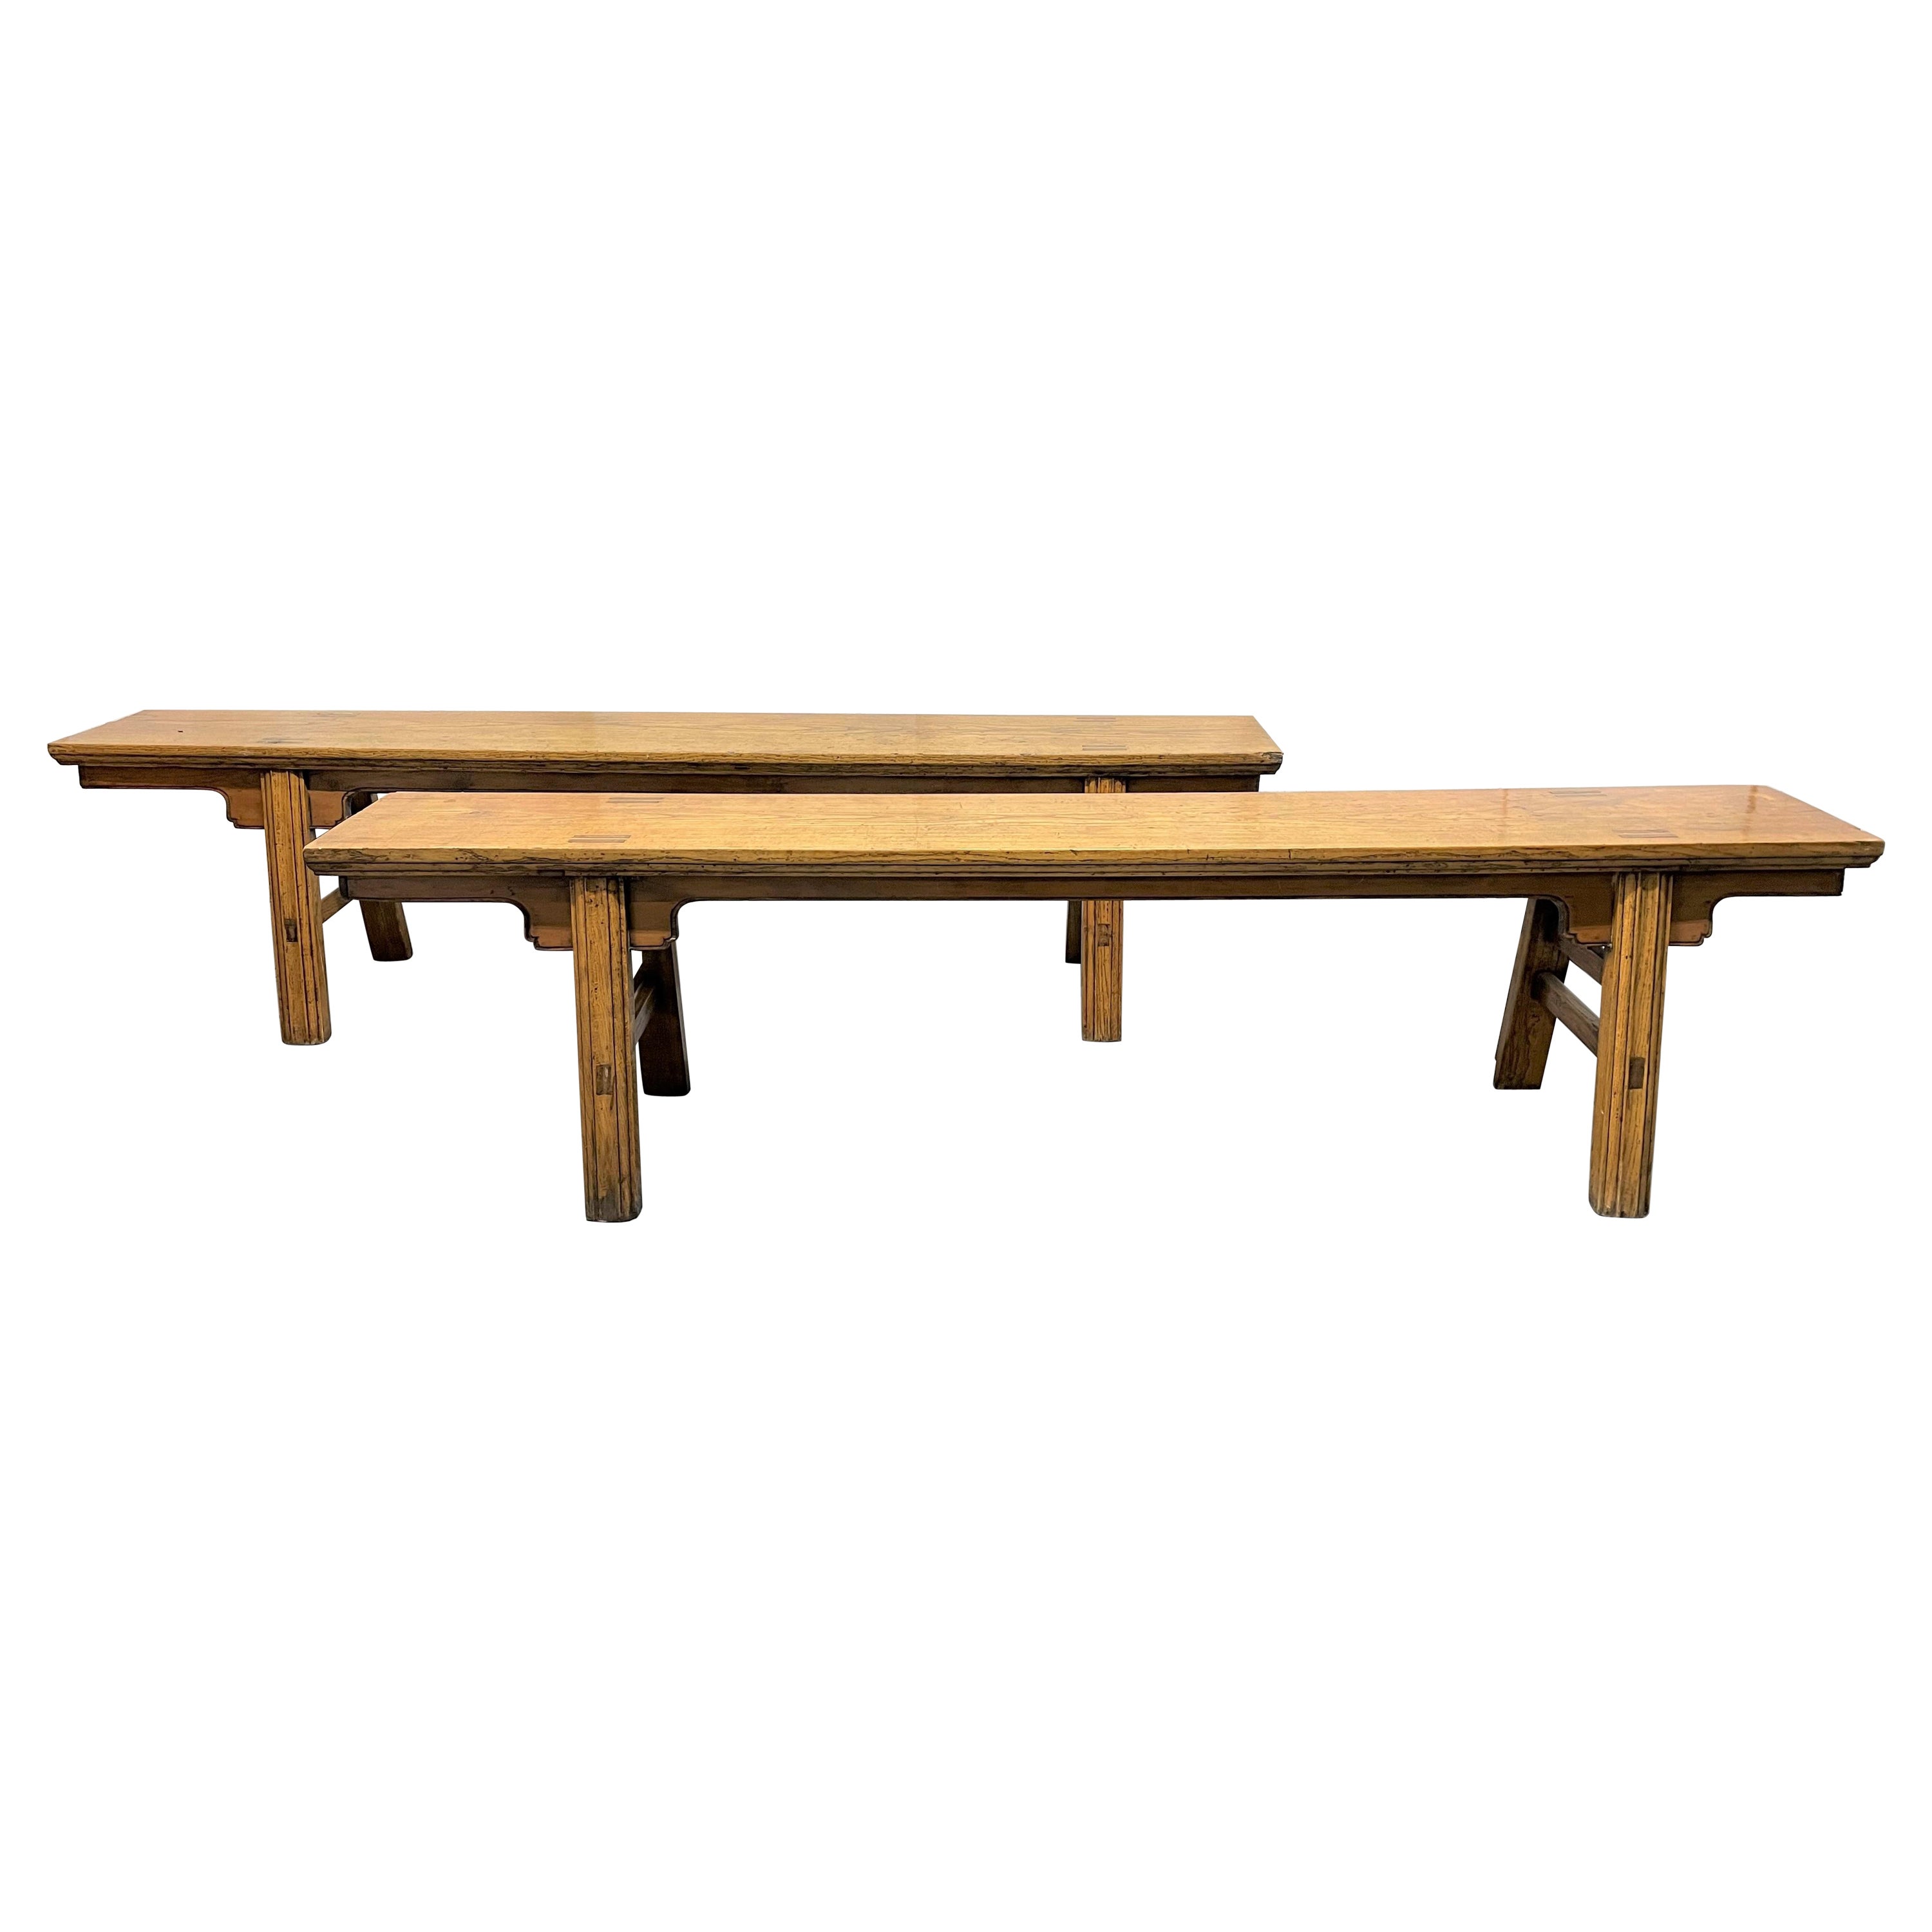 Pair of 19th Century Long Elmwood Asian Benches For Sale at 1stDibs